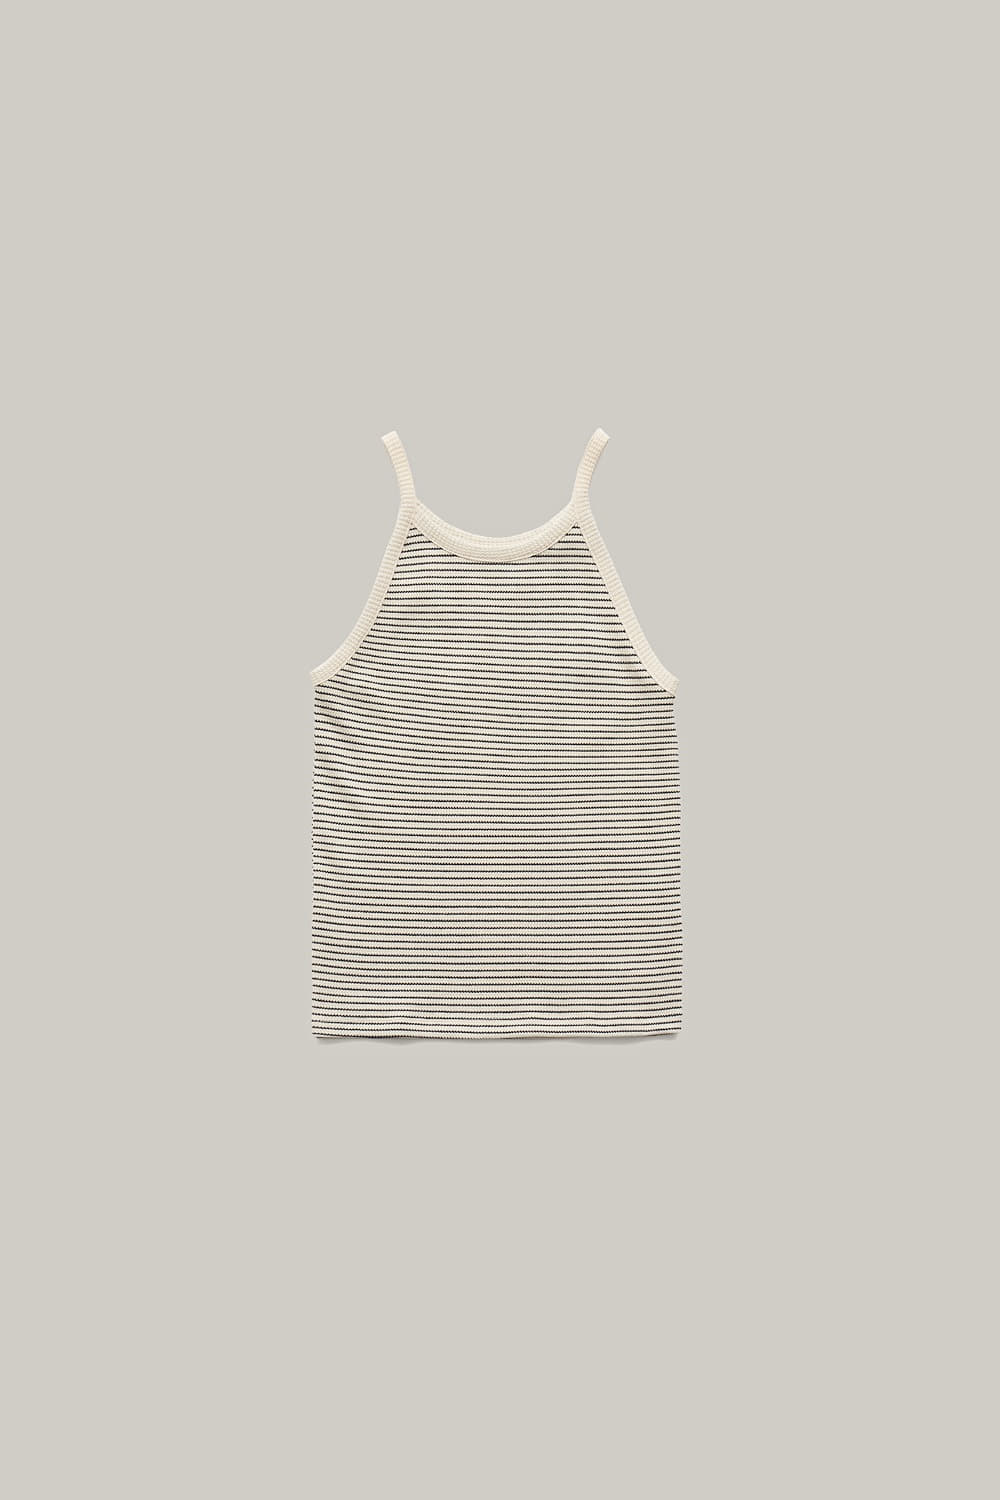 4th/Coloring sleeveless top (Stripe)